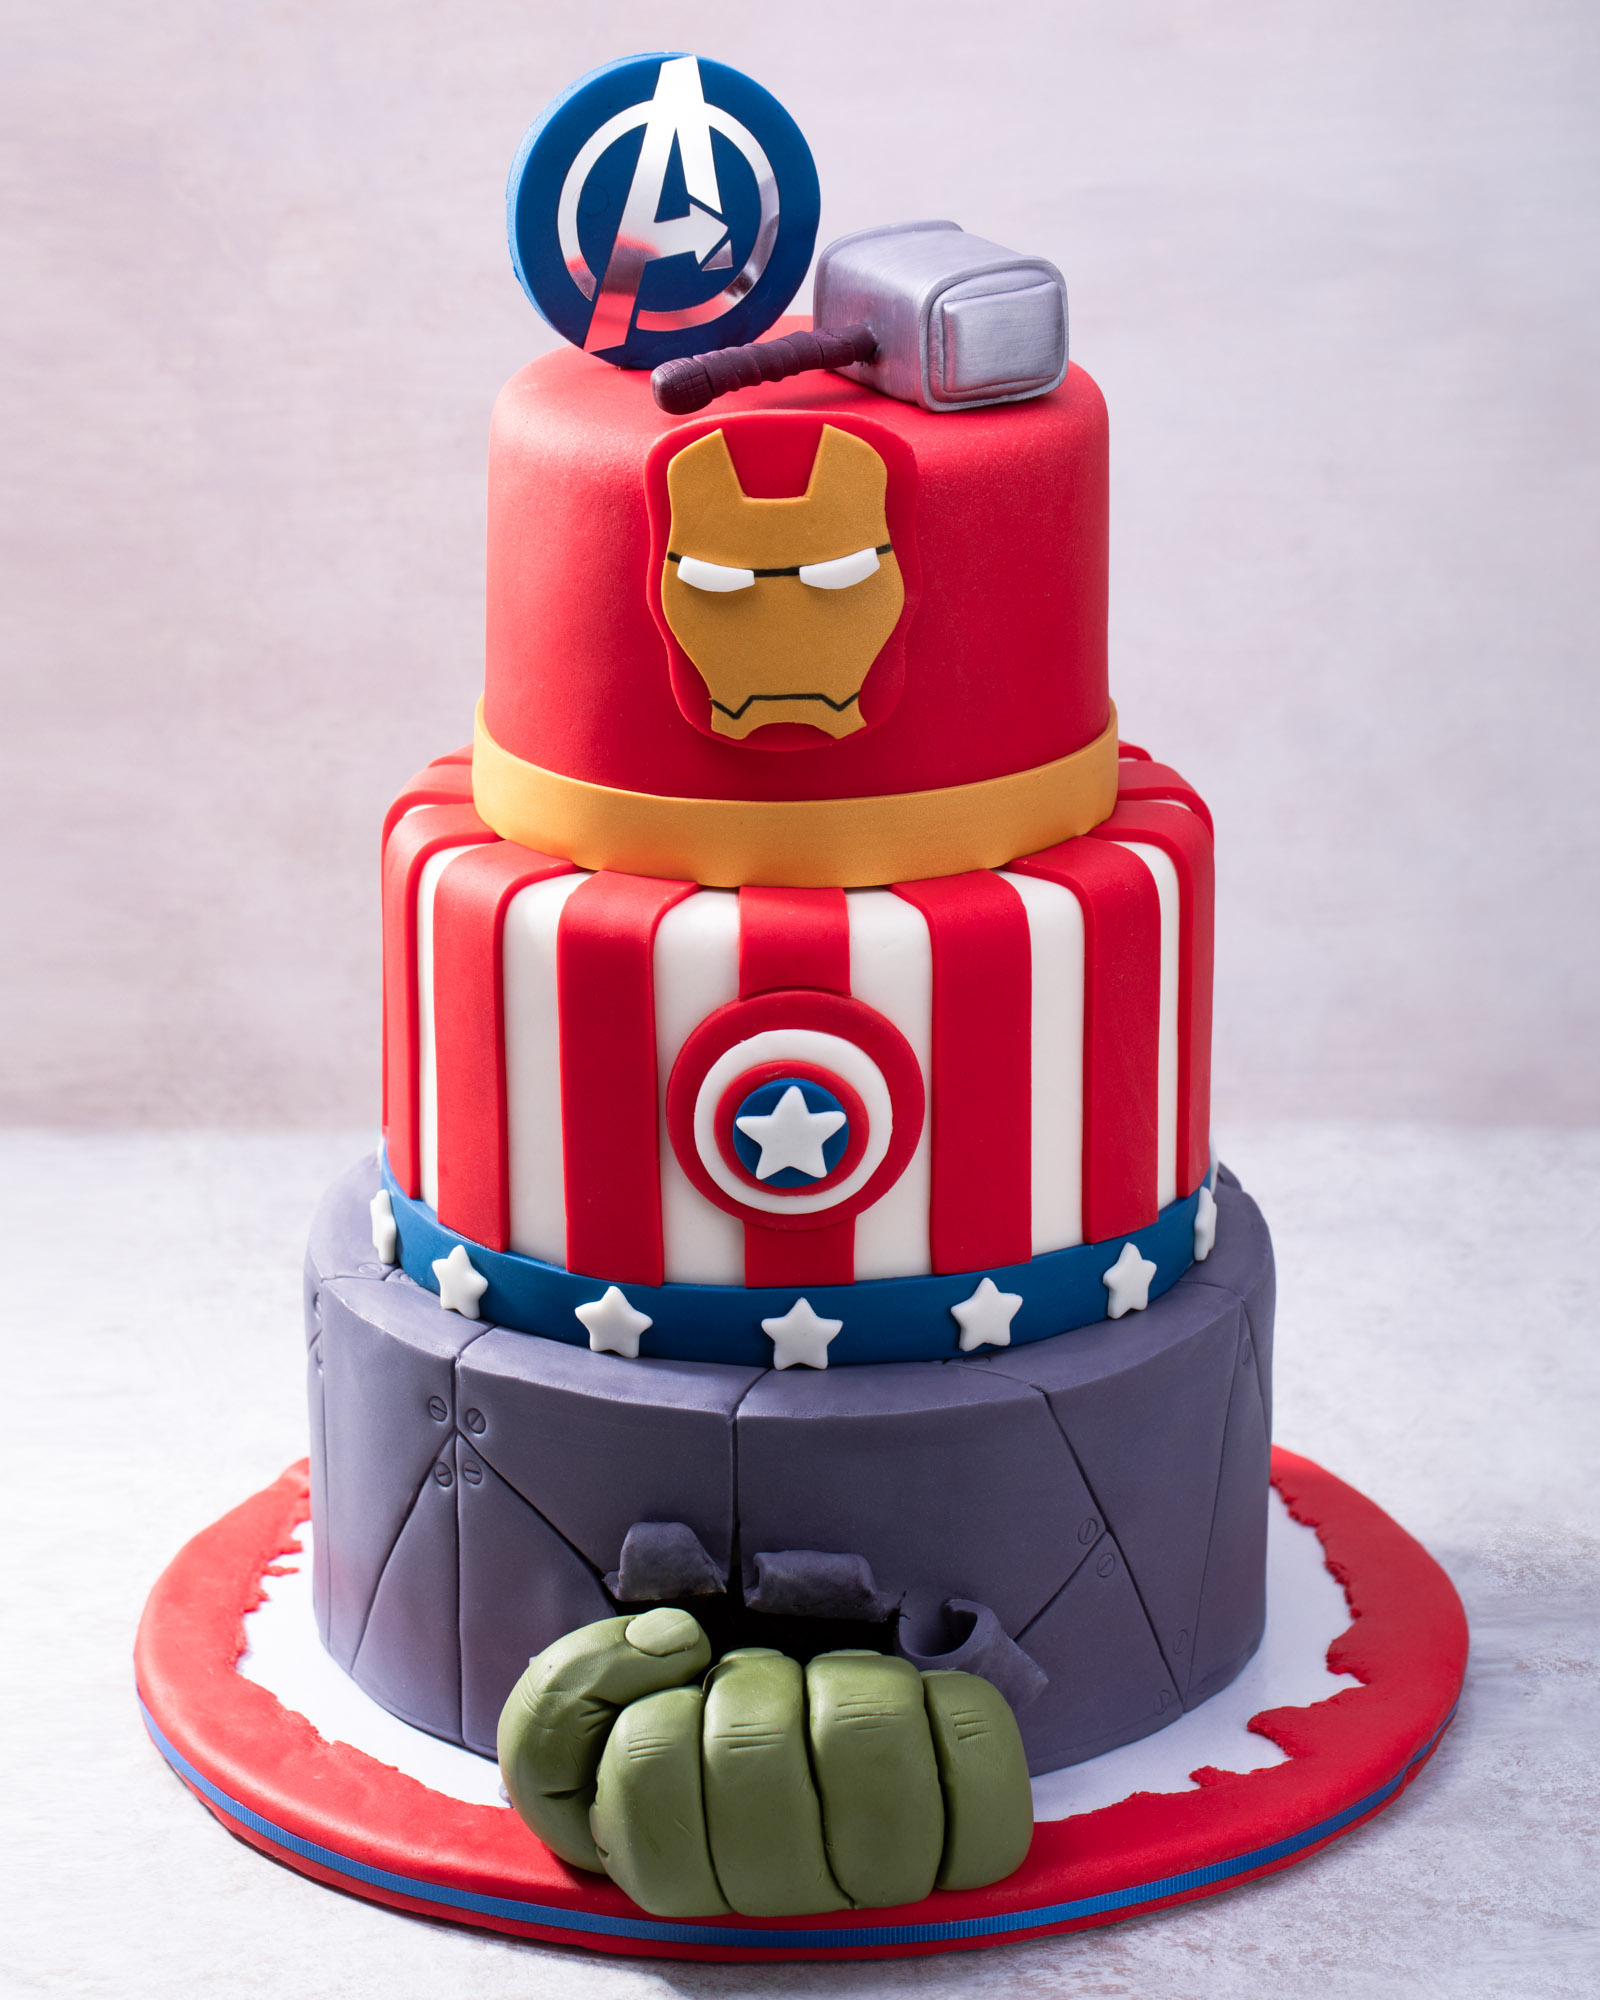 Avengers themed 2 tier cake with batman, spiderman, iron man and deadpool | Tiered  cakes, Graduation cakes, Cake designs